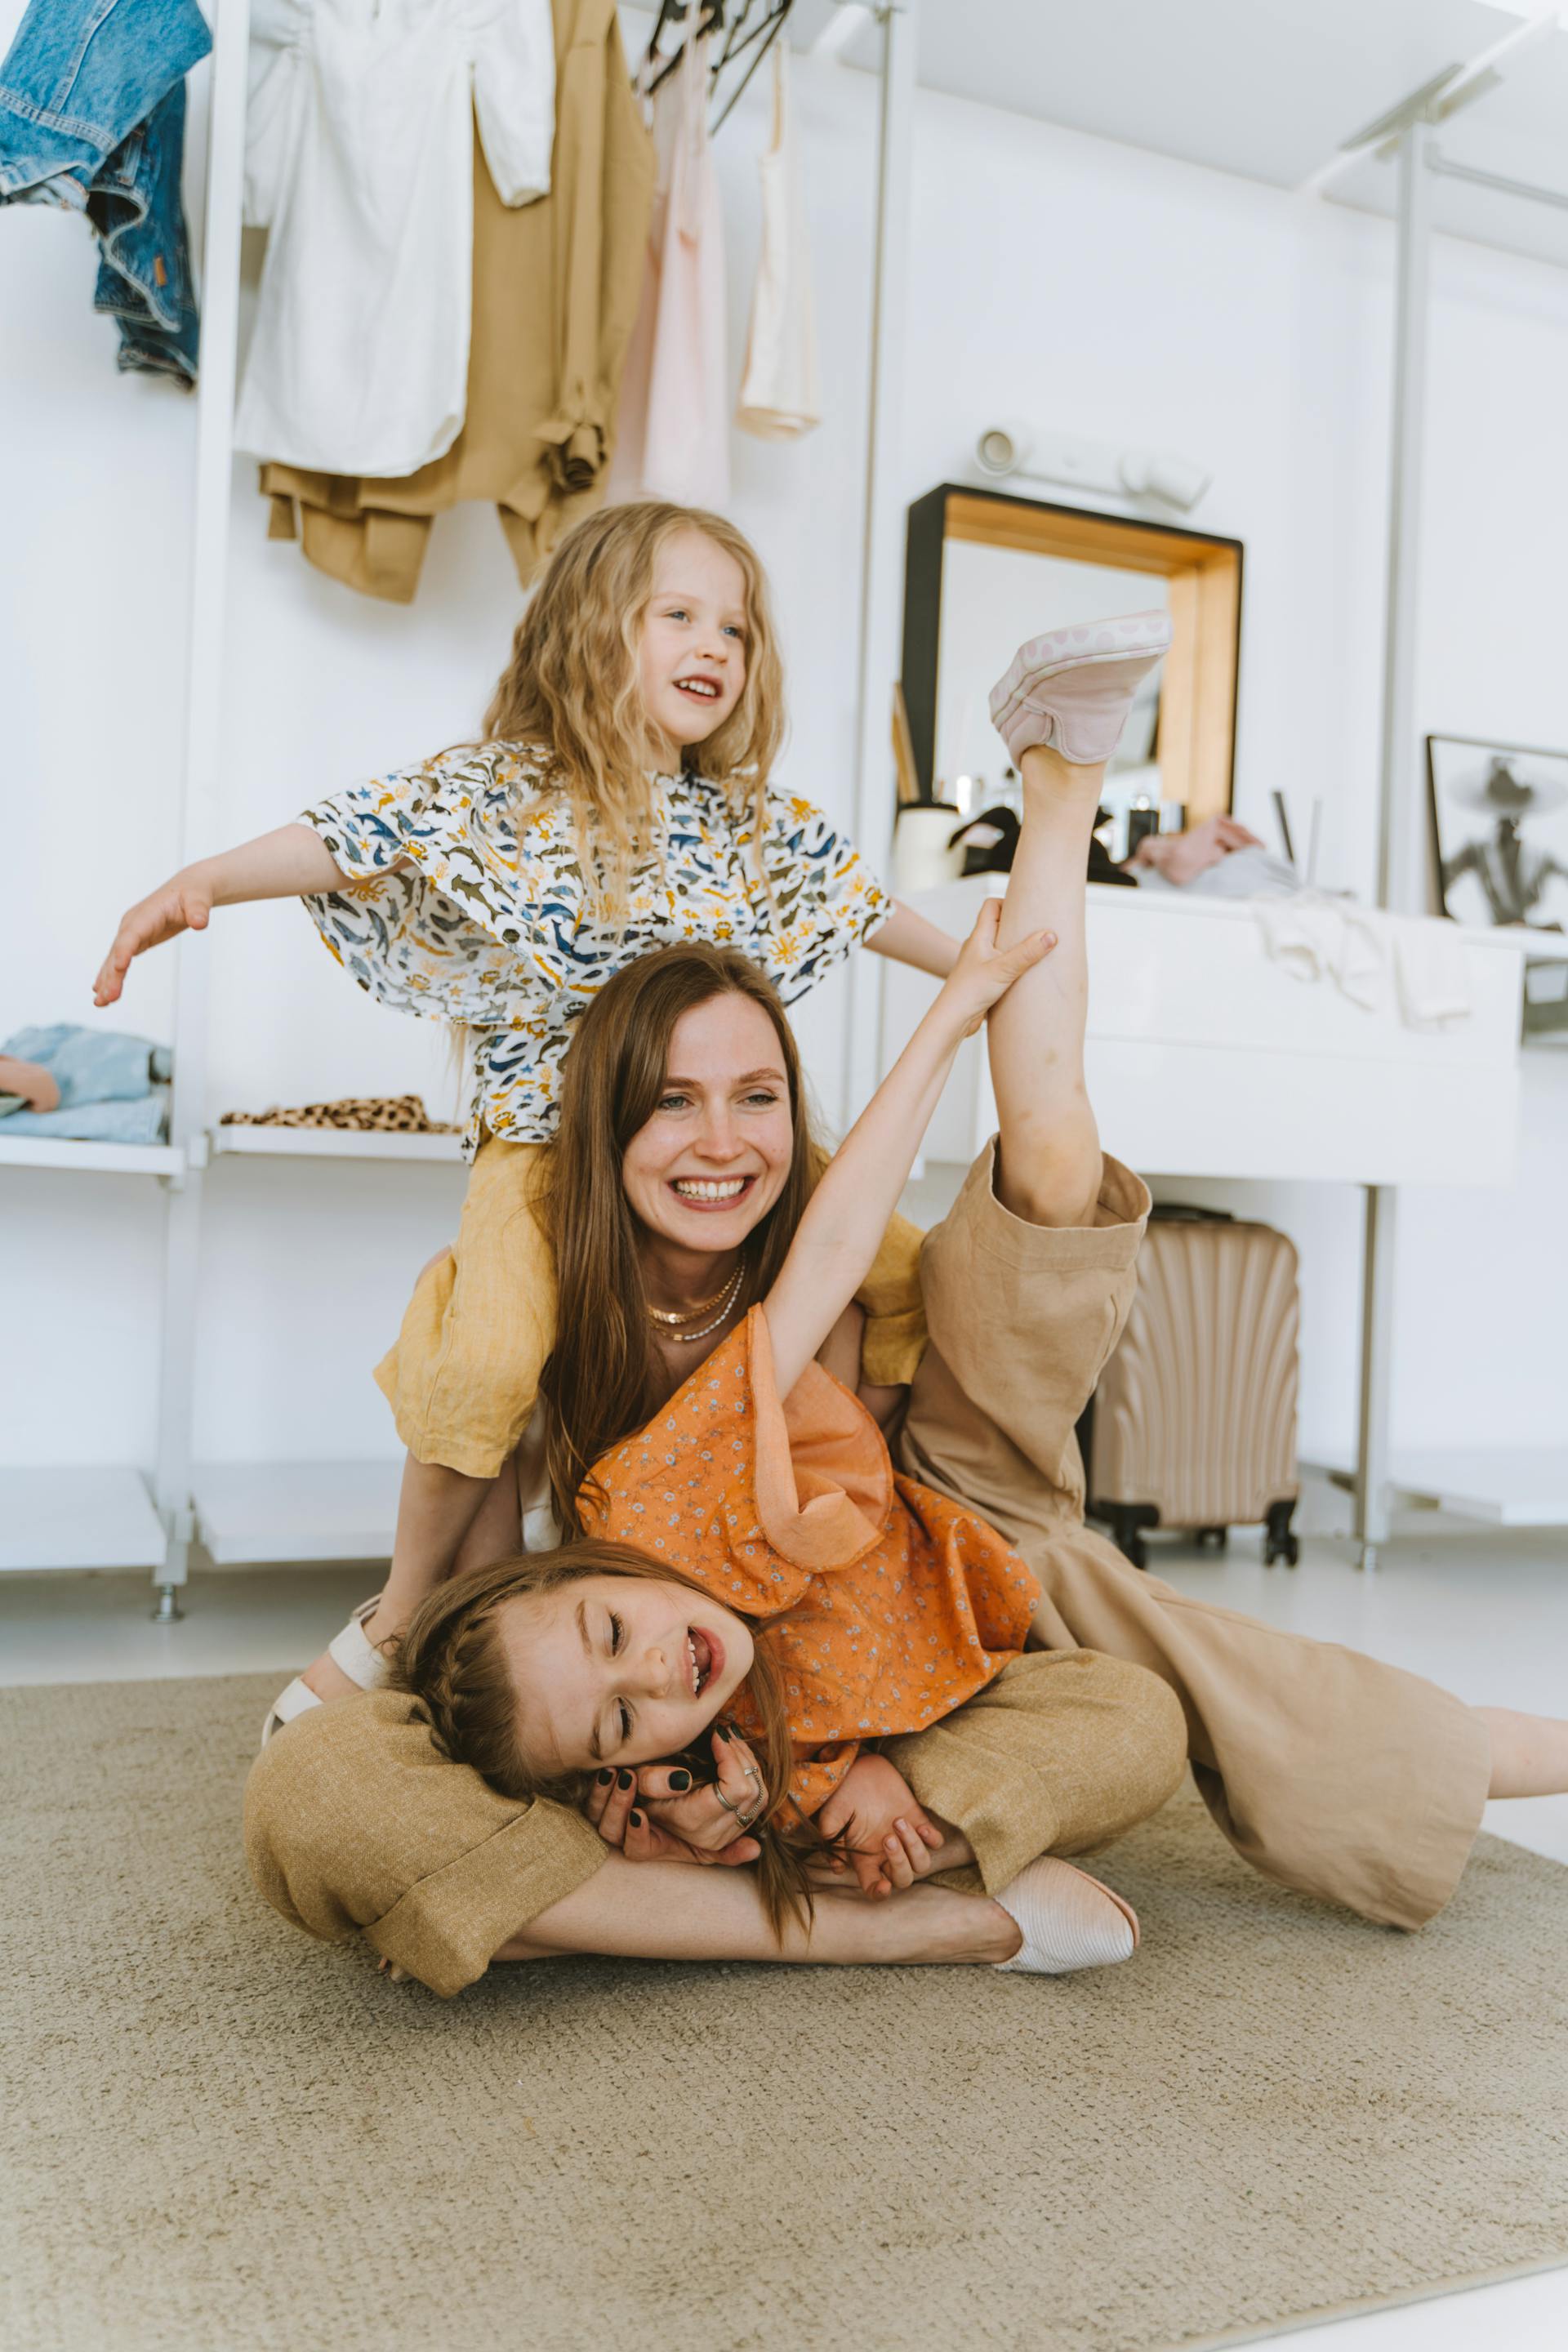 Mom and daughters | Source: Pexels